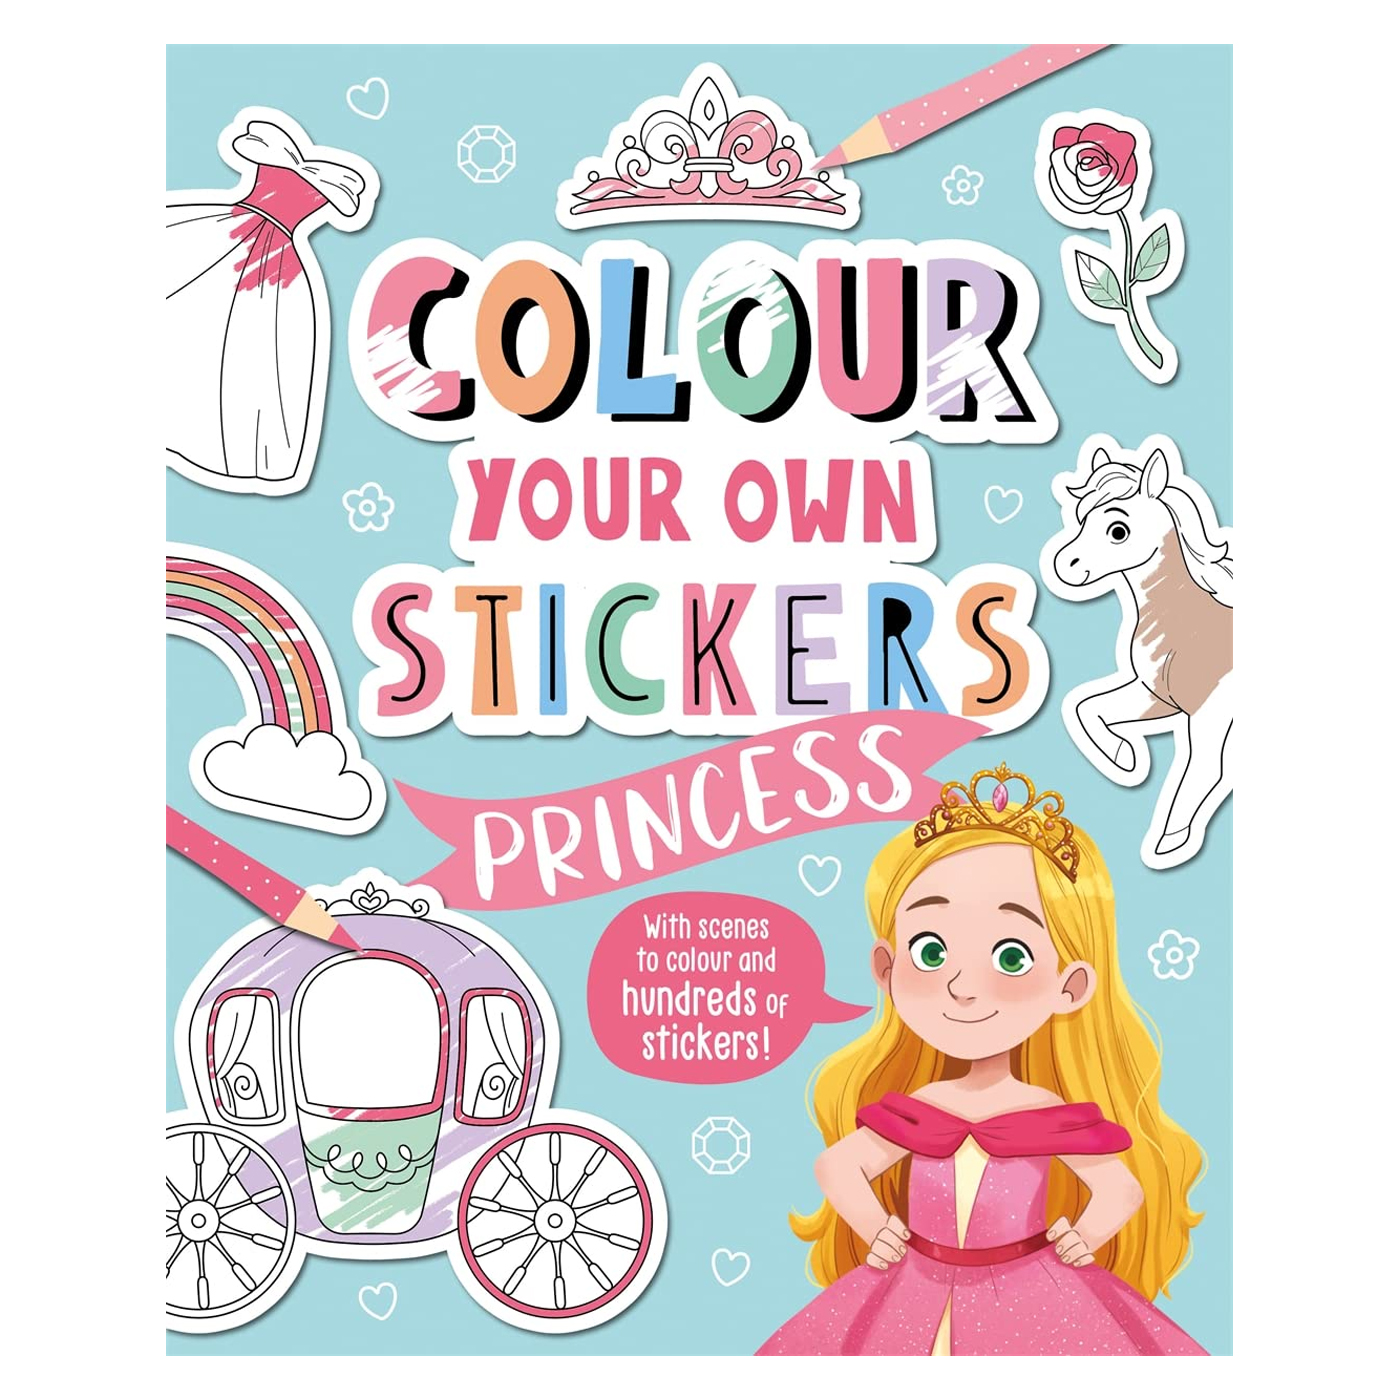  Colour Your Own Stickers: Princess